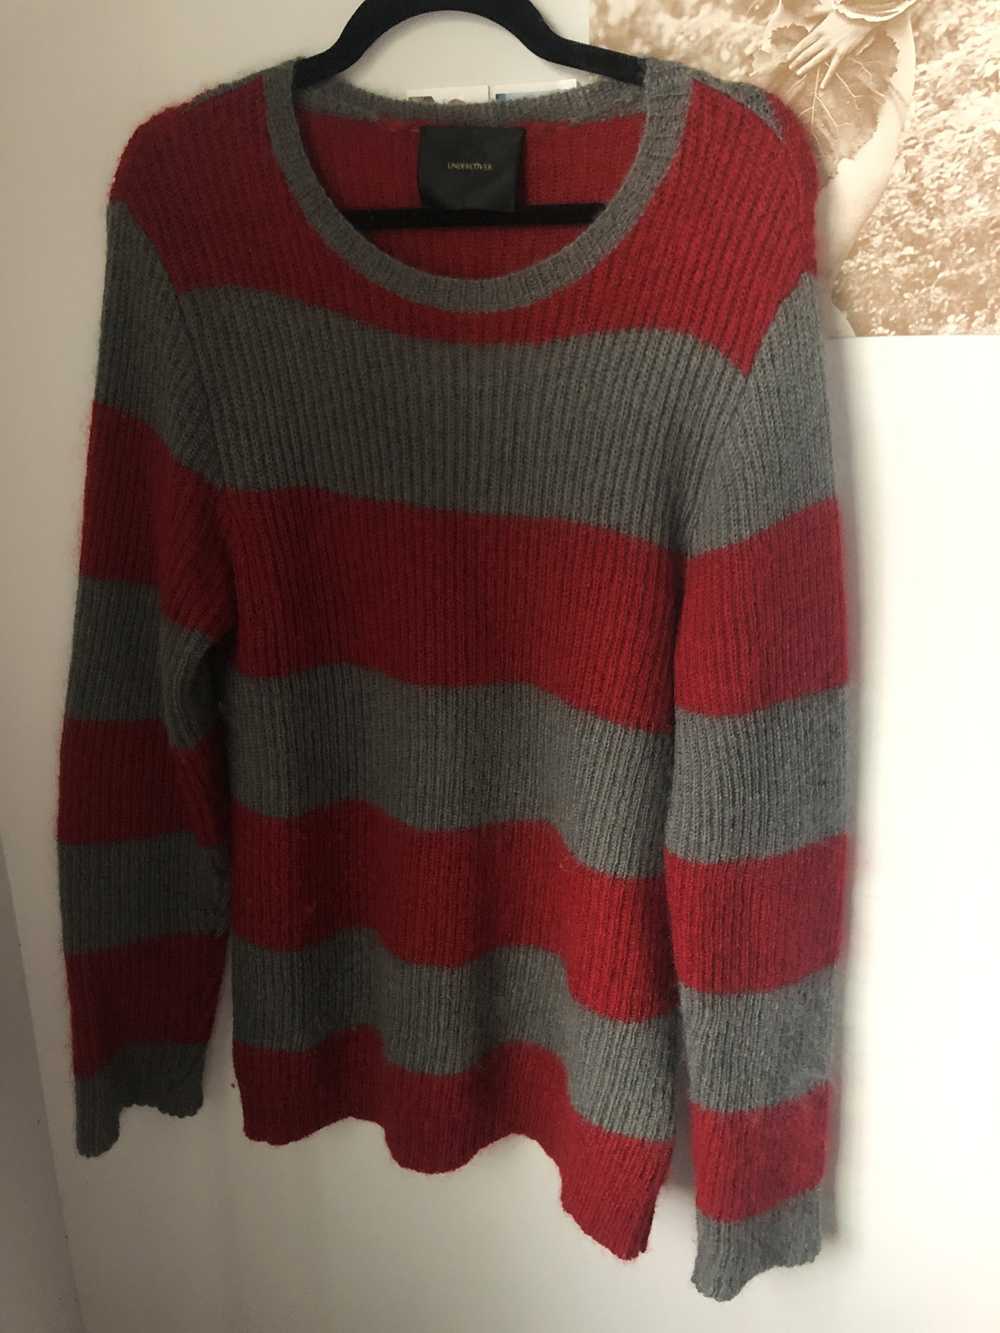 Undercover Undercover Grey and Red Striped Sweater - image 1